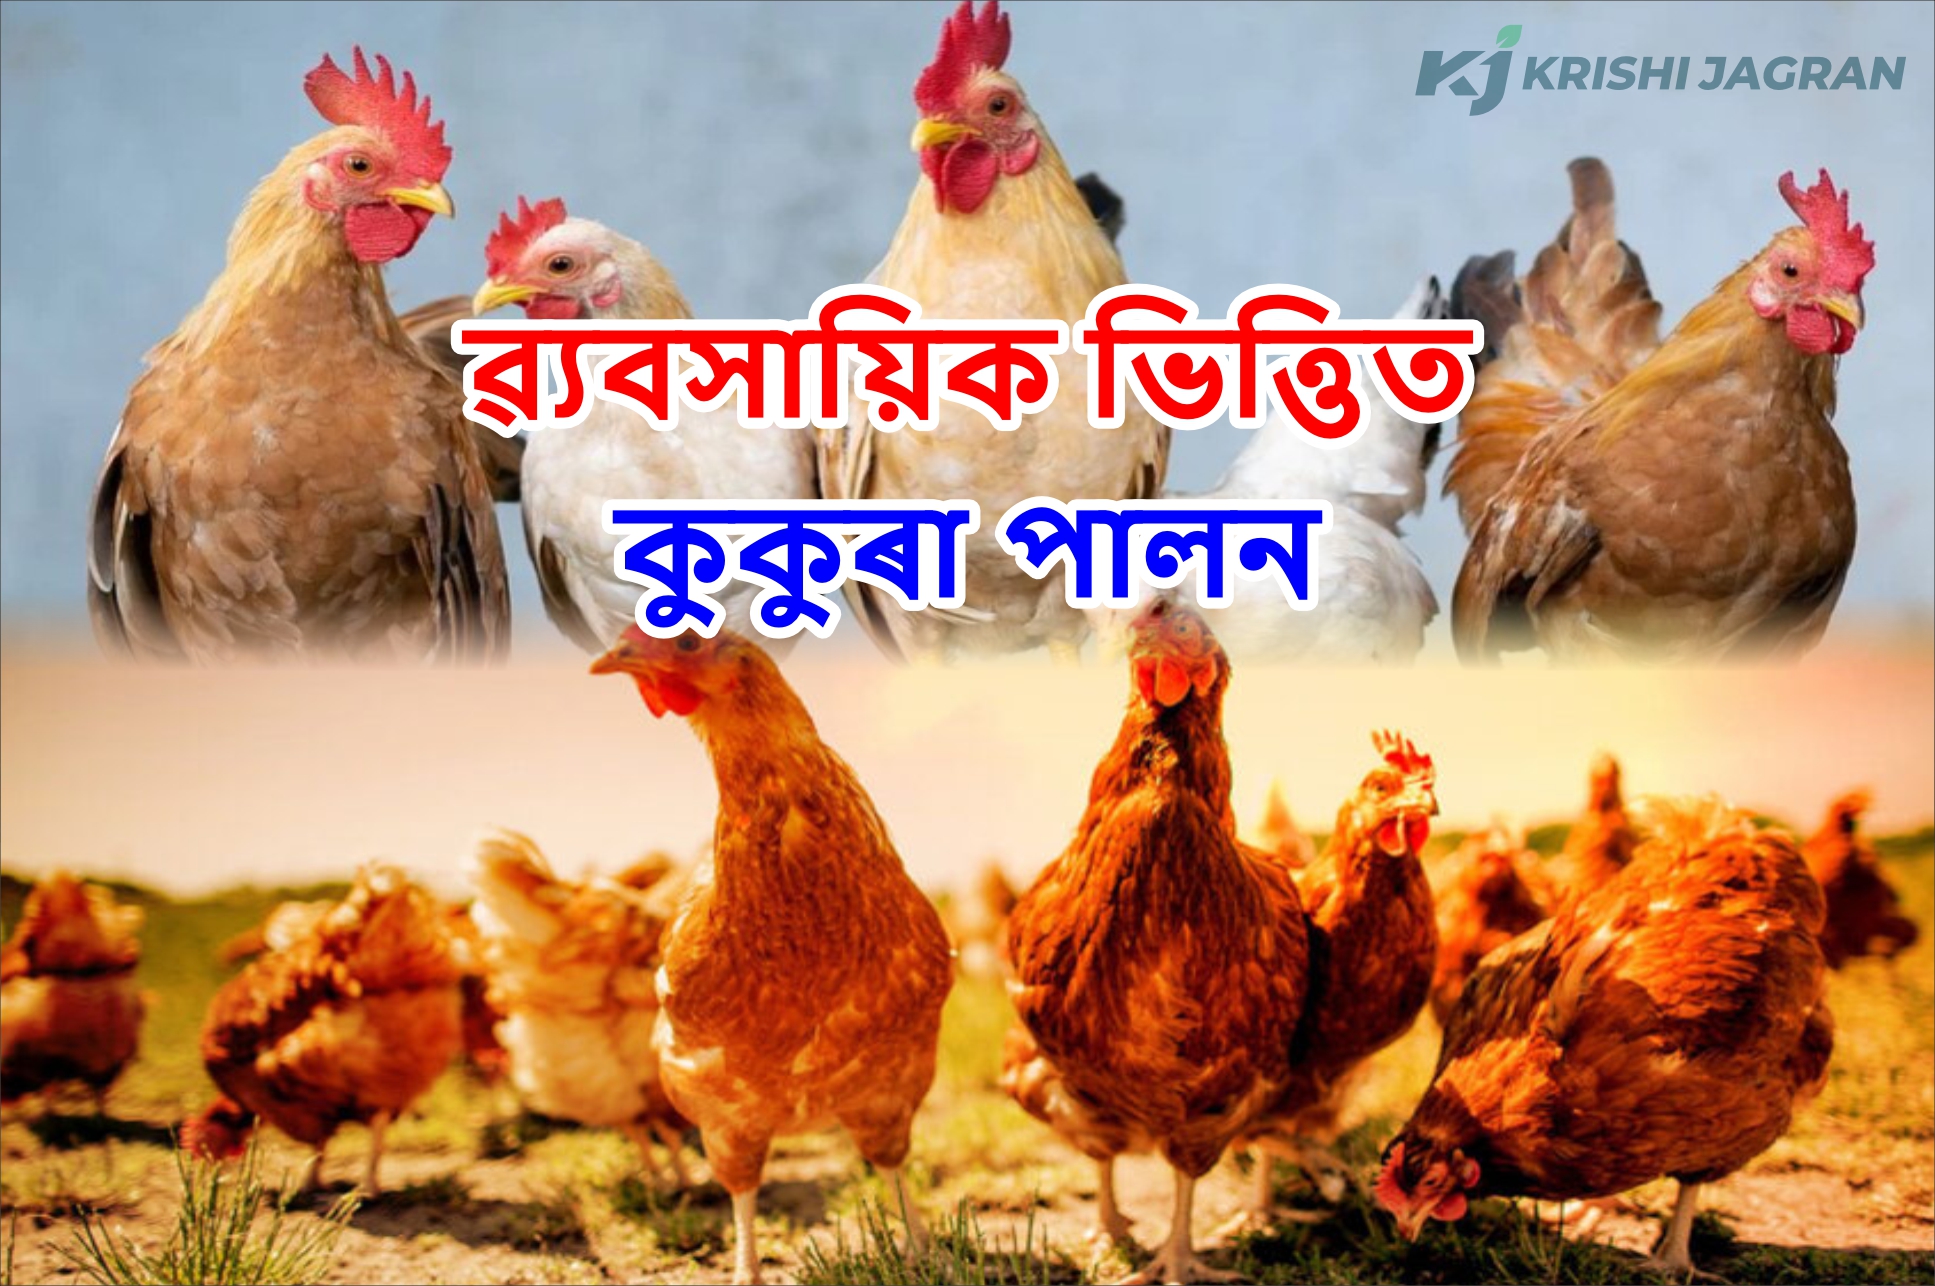 Poultry Farming! a Profitable Business for Farmers